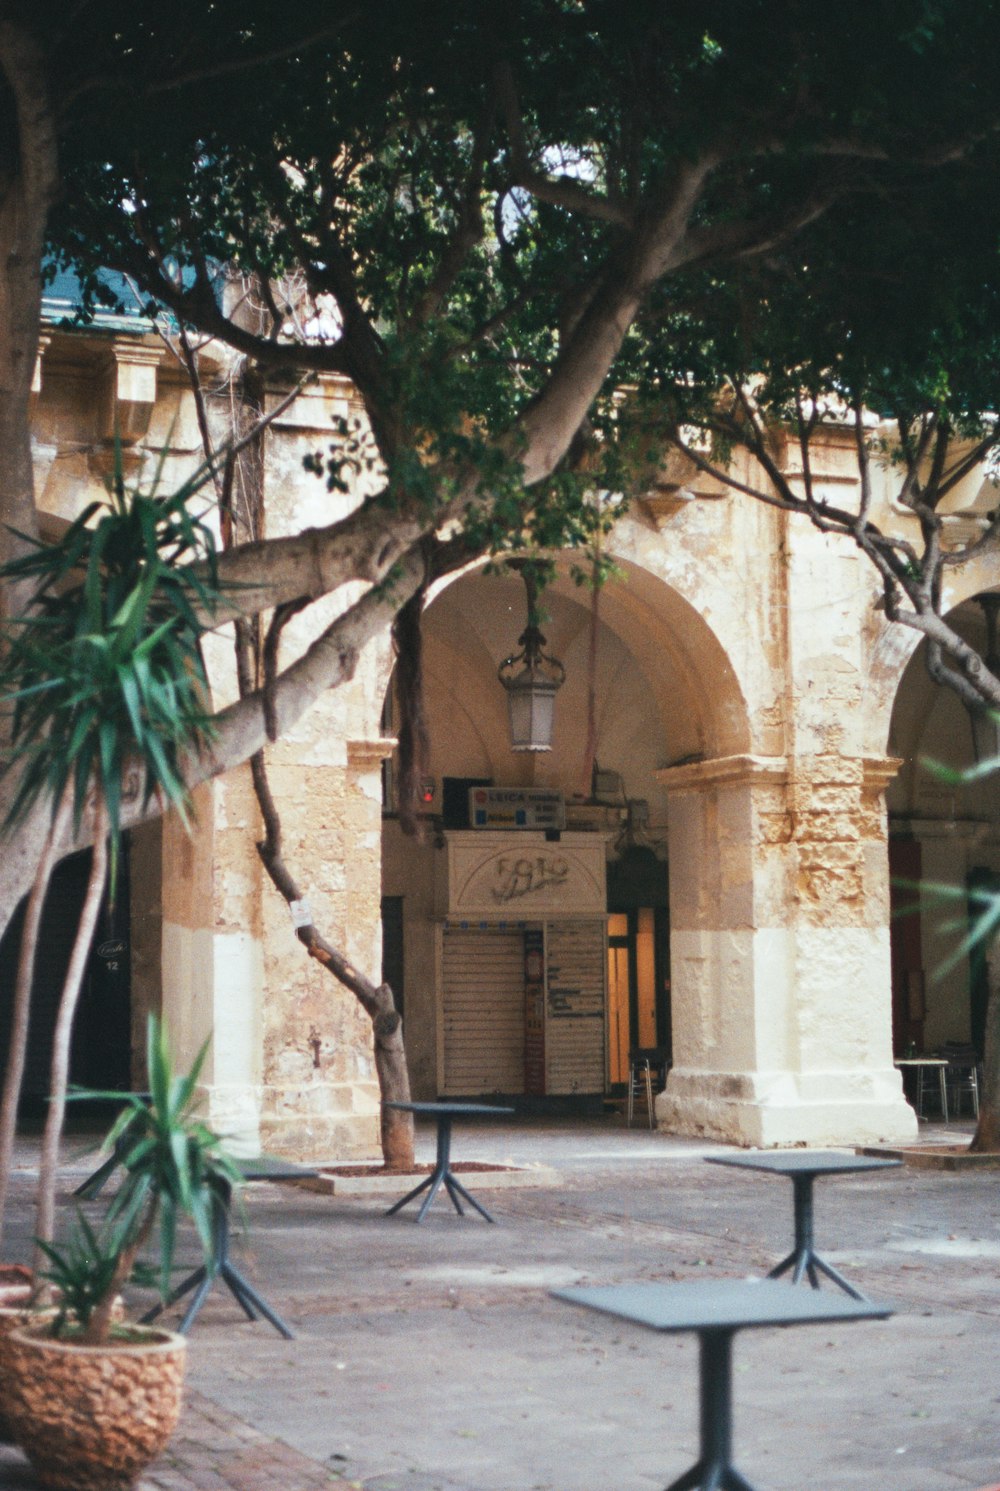 a courtyard with benches and trees in front of a building